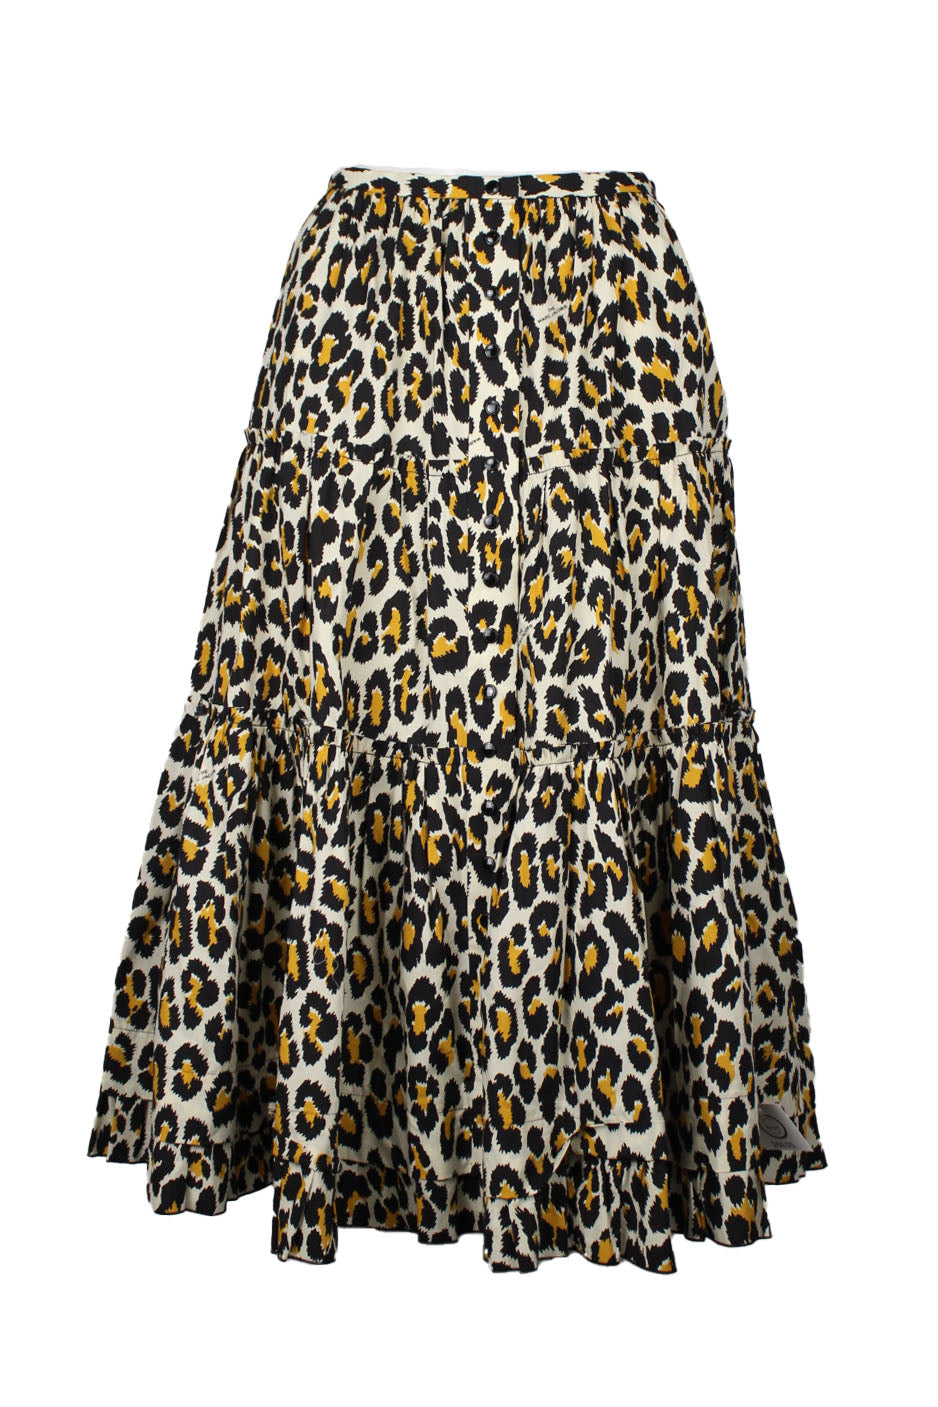 front of marc jacobs yellow cotton ruffle midi skirt. features cheetah print throughout, a-line fit, ruffled design, and multi button closure.